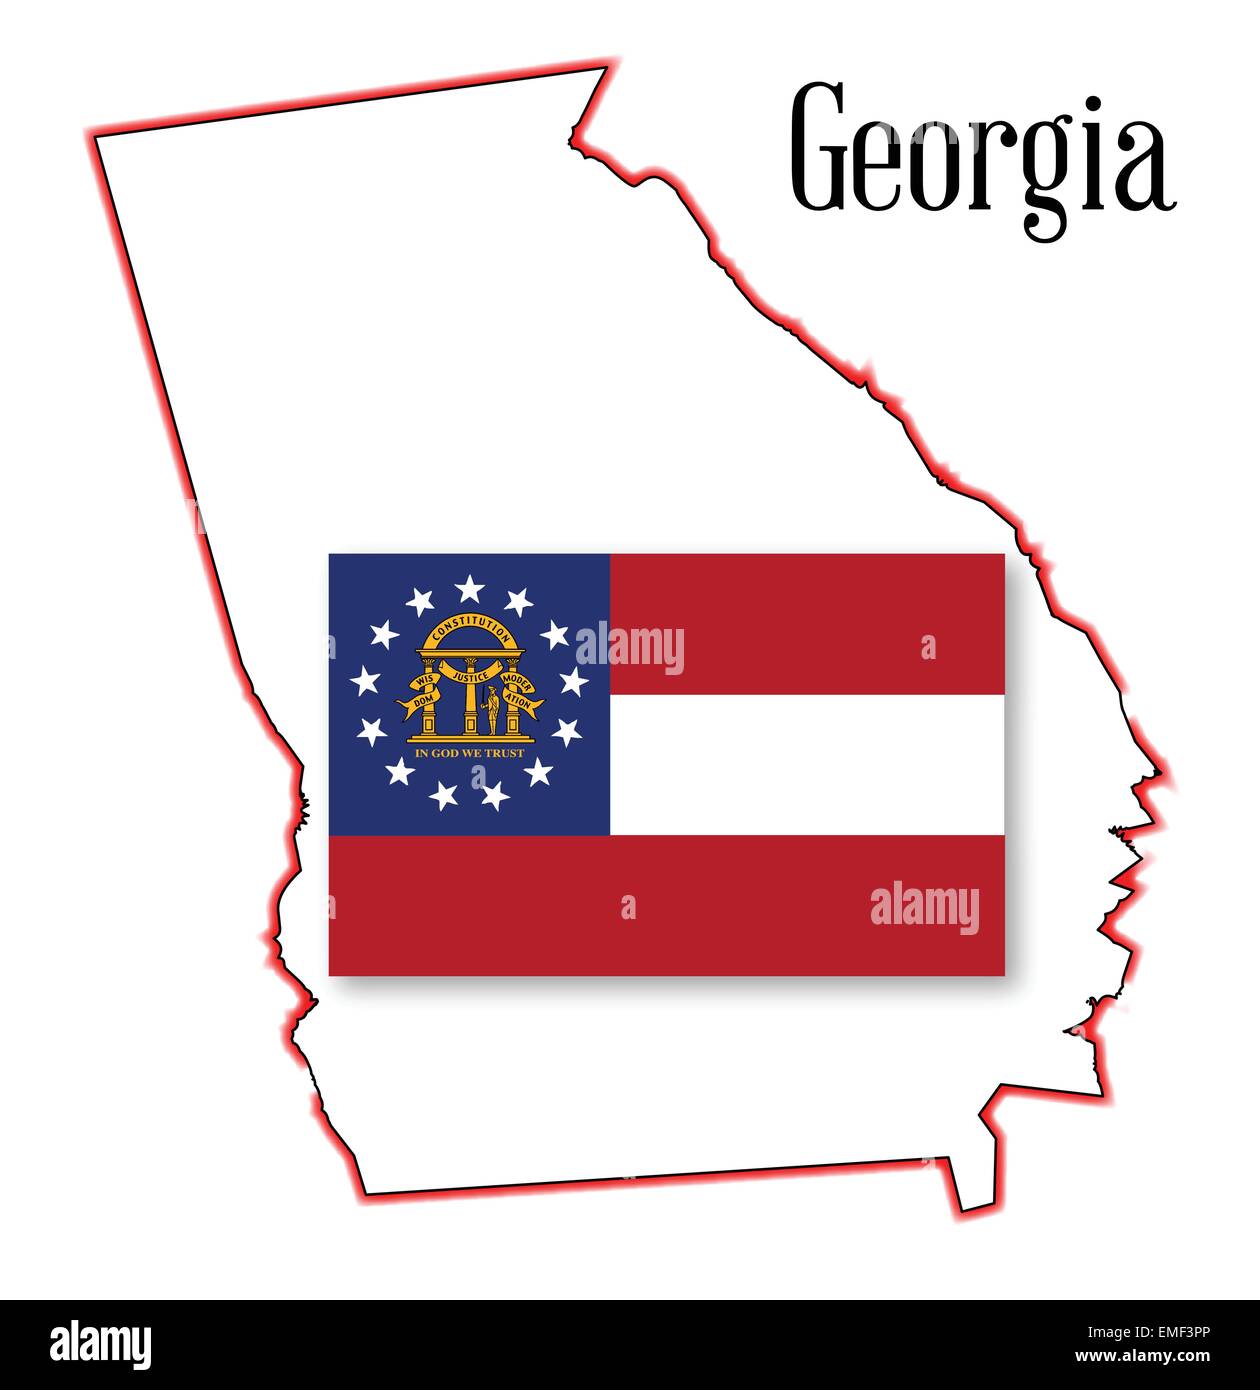 Georgia State Map and Seal Stock Vector